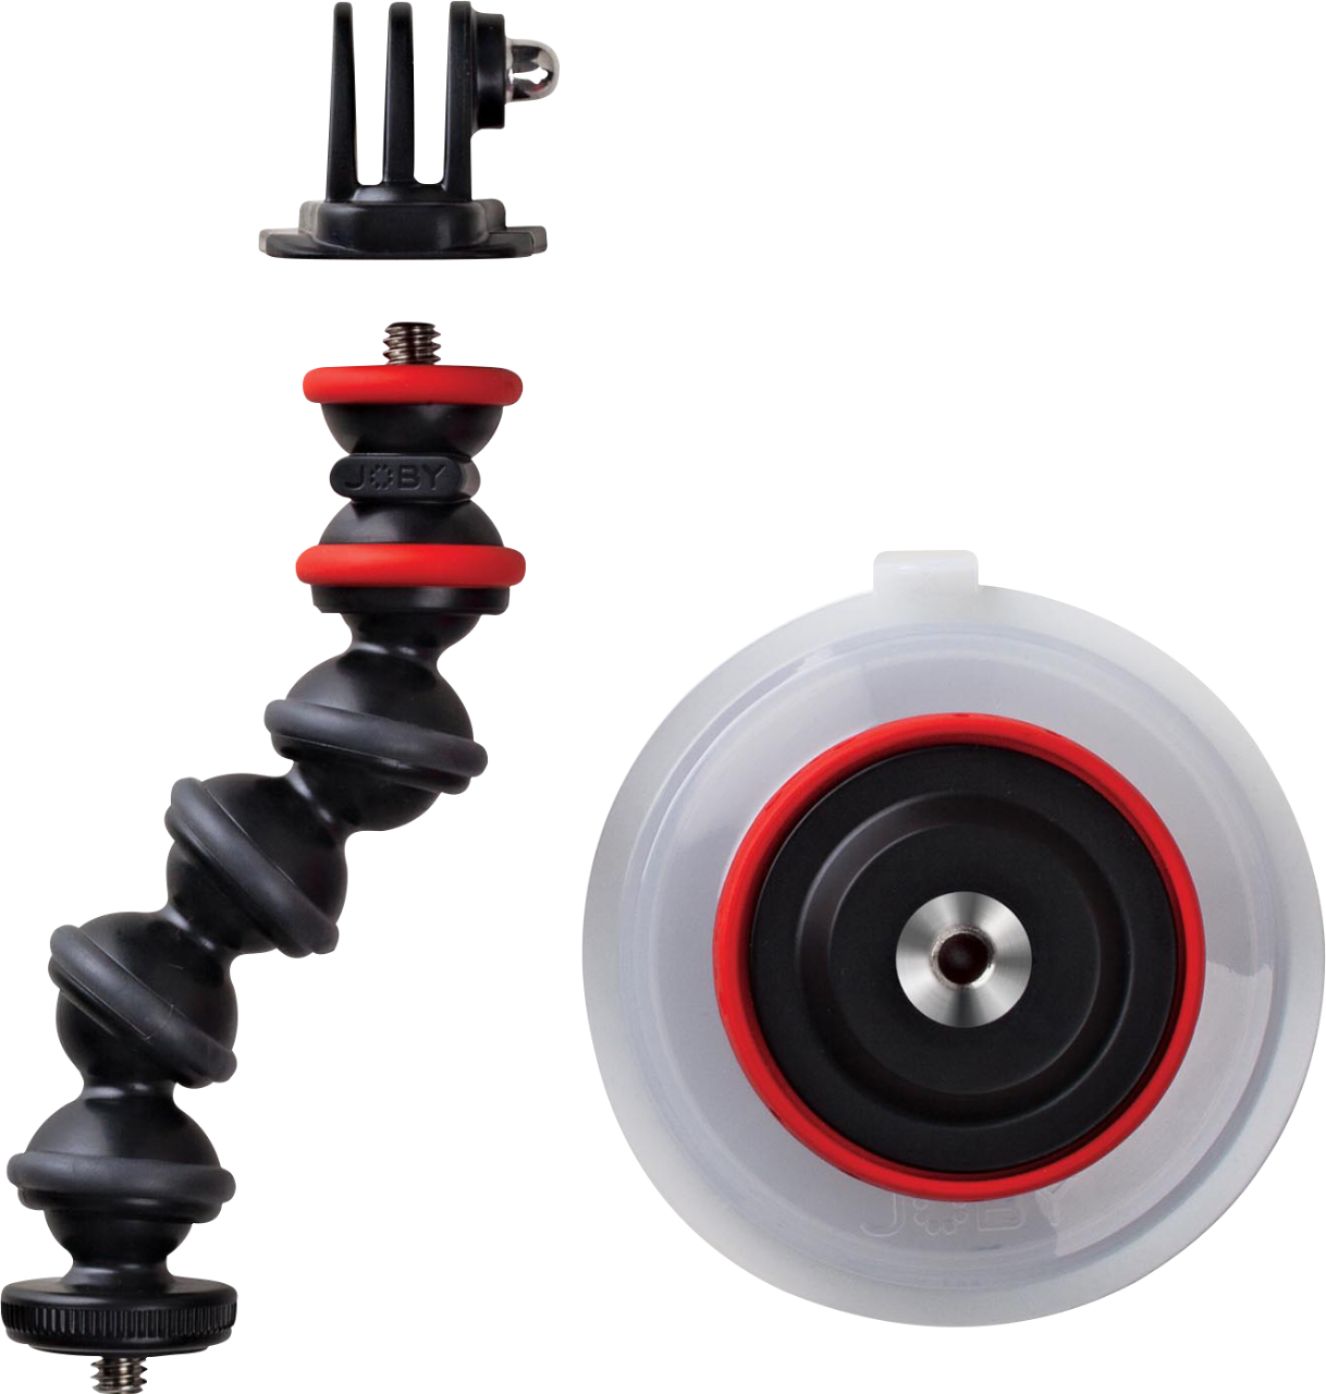 Angle View: JOBY - Action Series Suction Cup and GorillaPod Arm